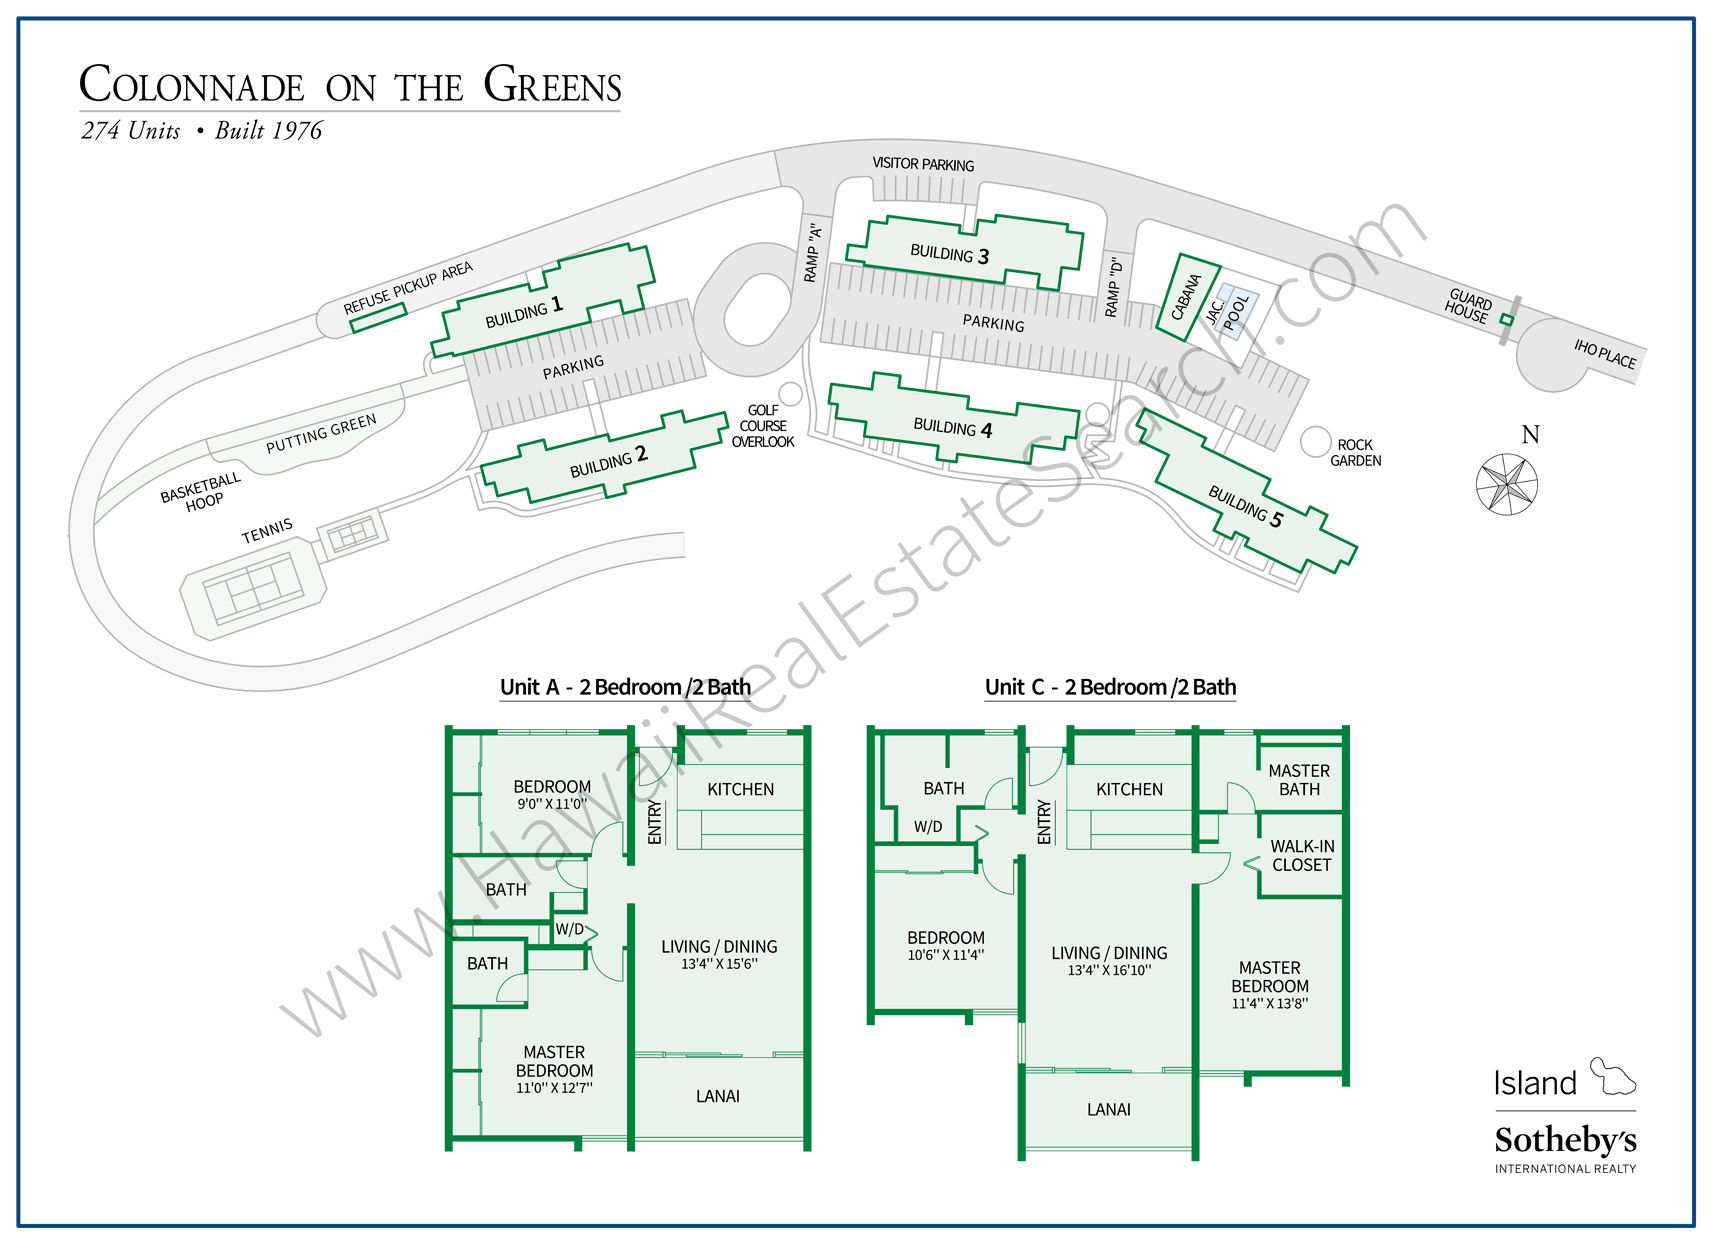 Colonnade on the Green - Map and Floor Plans